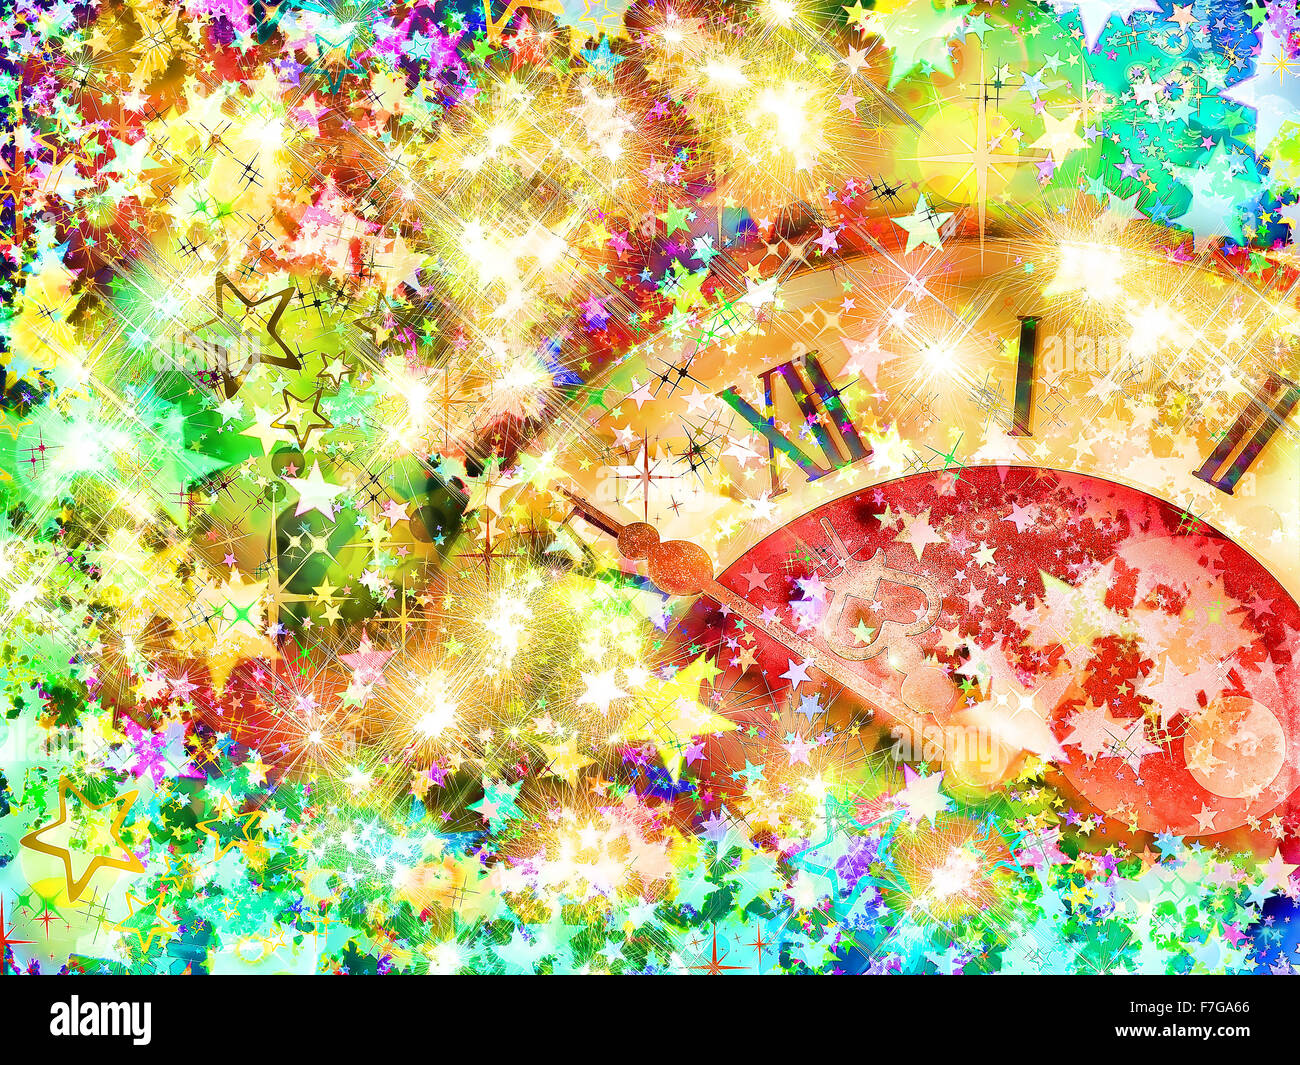 Eve of new year.Clock face on multicolored shining stars background. Stock Photo